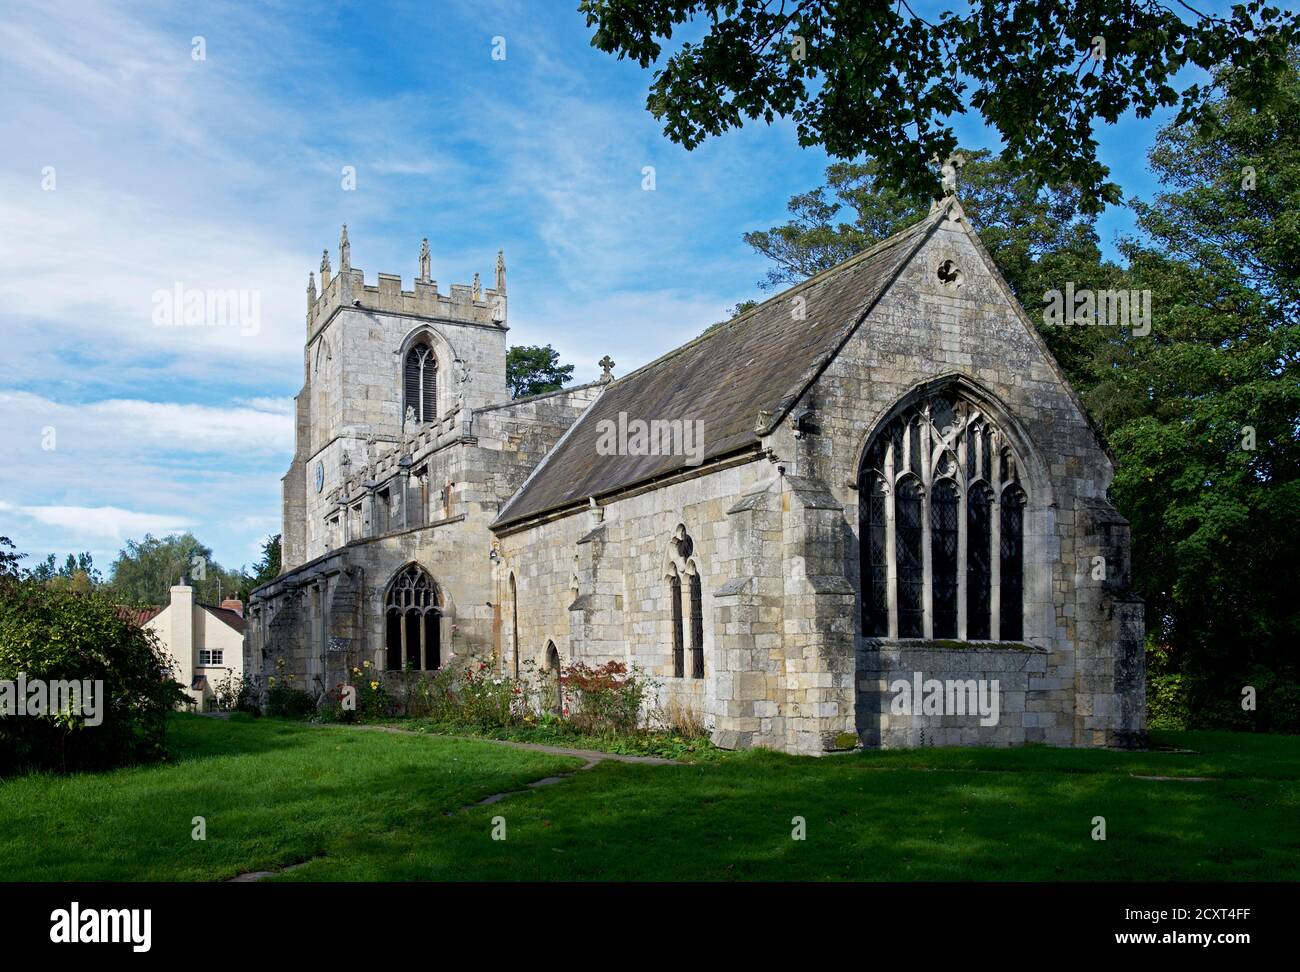 All Saints Church in the village of Bubwith, East Yorkshire, England UK Stock Photo